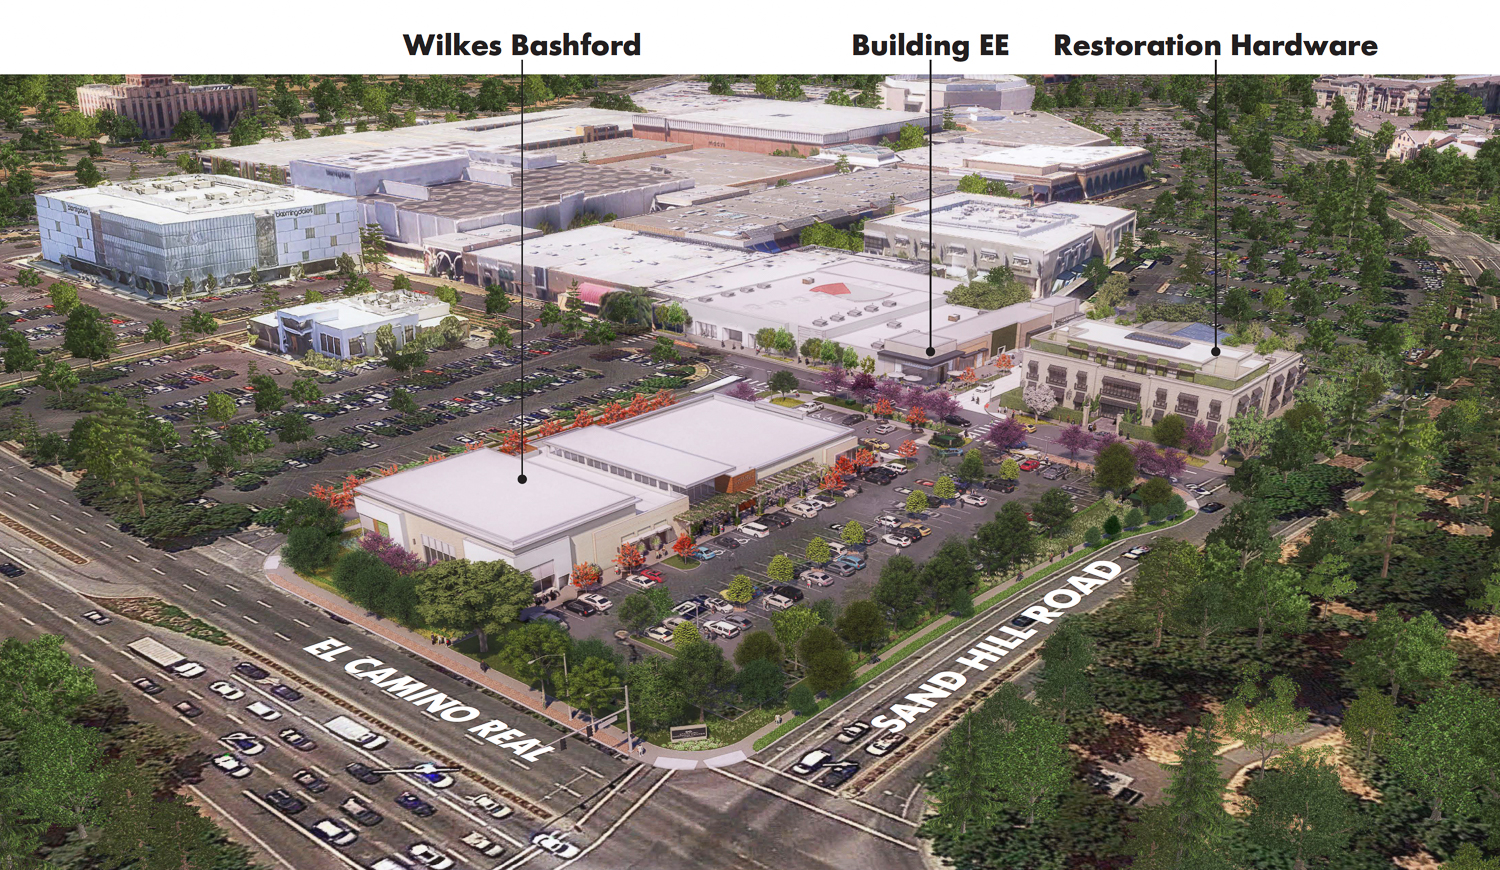 Redevelopment of the Macy's Men's shop and parking lot in the Stanford Shopping Center, rendering by GH+A design Studios